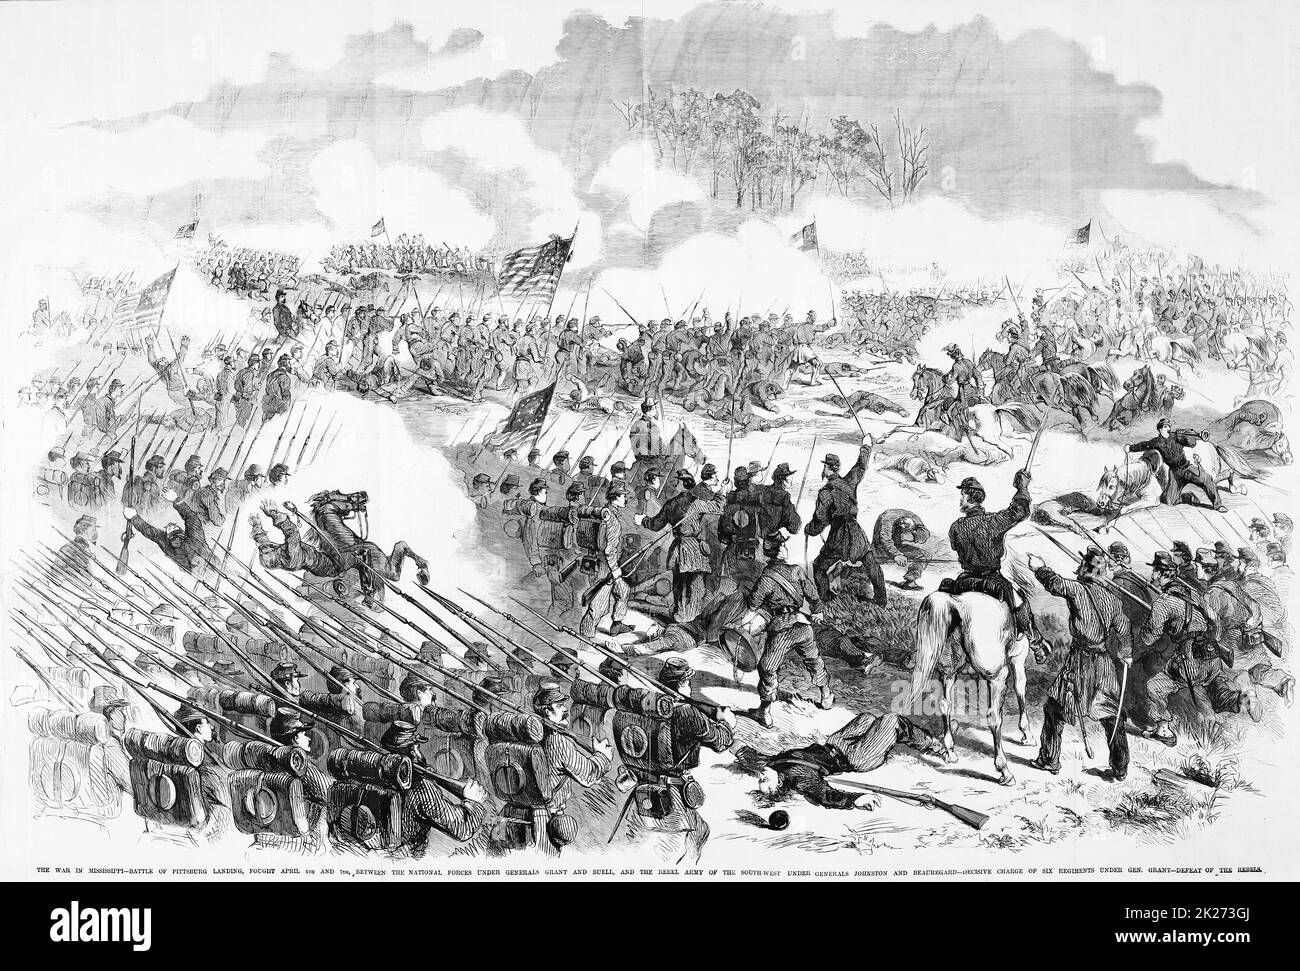 The War in Mississippi - Battle of Pittsburg Landing, fought April 6th and 7th, 1862, between the National forces under Generals Ulysses S. Grant and Don Carlos Buell, and the Rebel Army of the southwest under Generals Albert Sidney Johnston and P. G. T. Beauregard - Decisive charge of six regiments under General Grant - Defeat of the Rebels. Battle of Shiloh. 19th century American Civil War illustration from Frank Leslie's Illustrated Newspaper Stock Photo